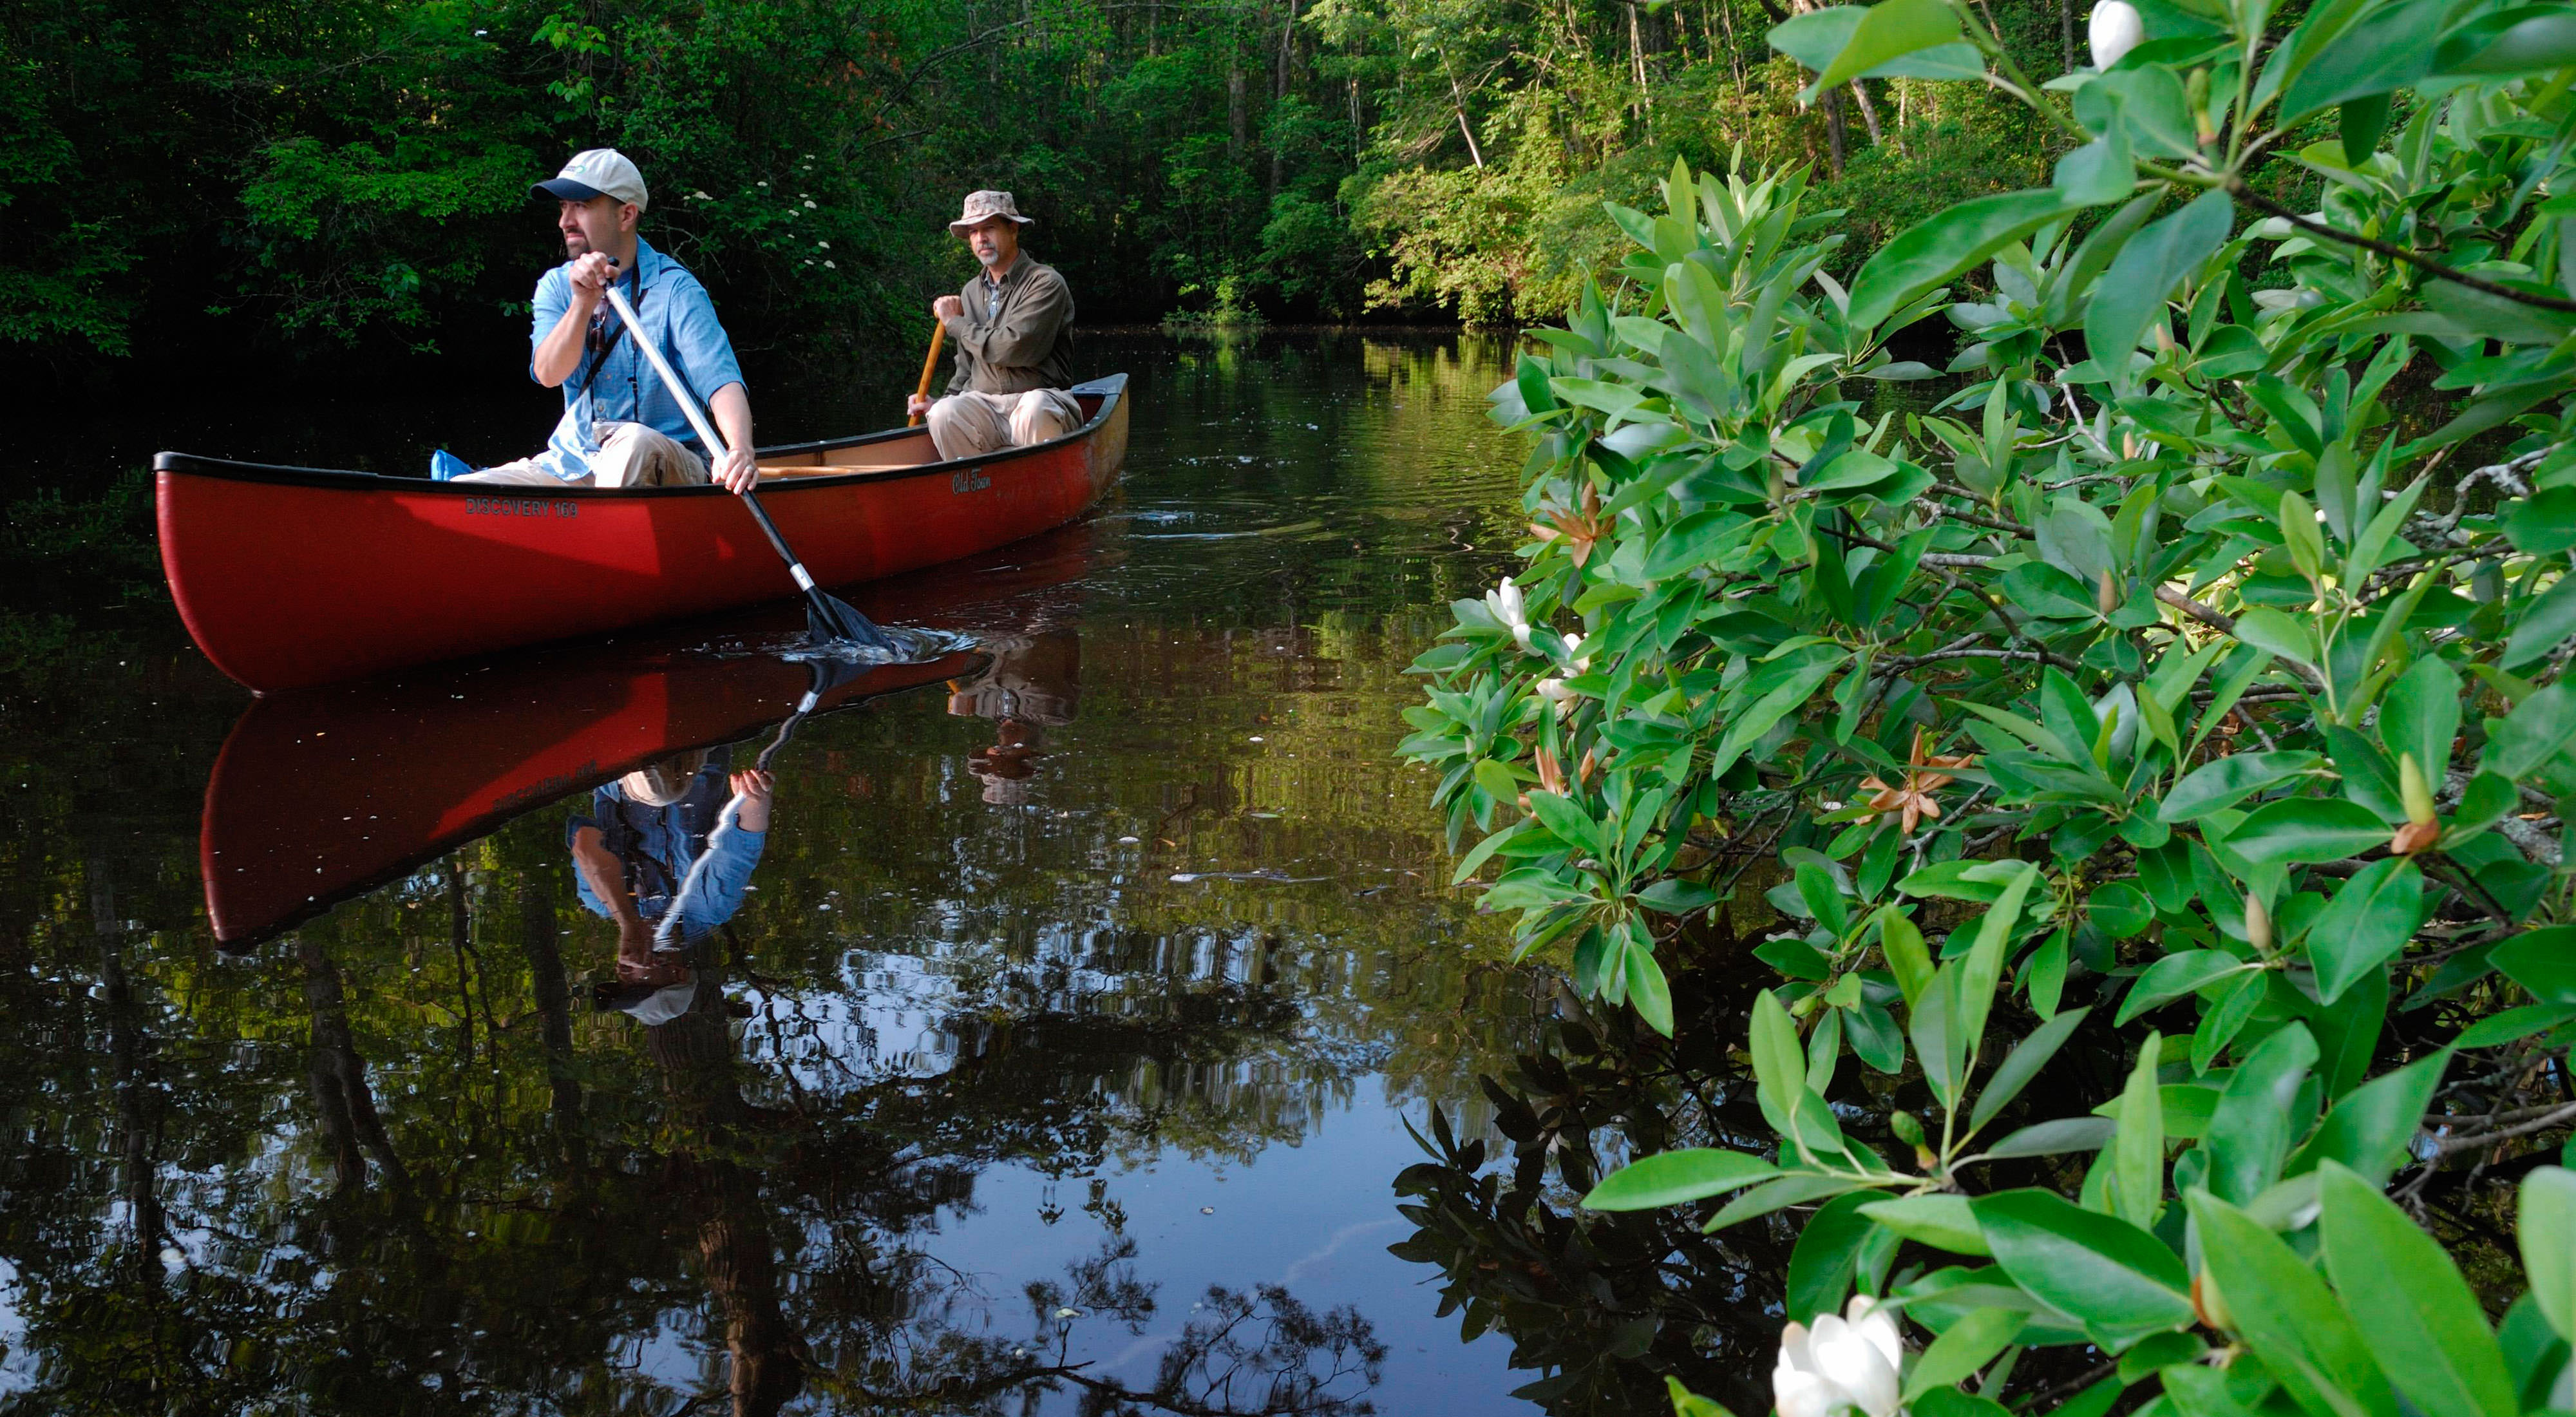 Two people paddle a canoe through still waters